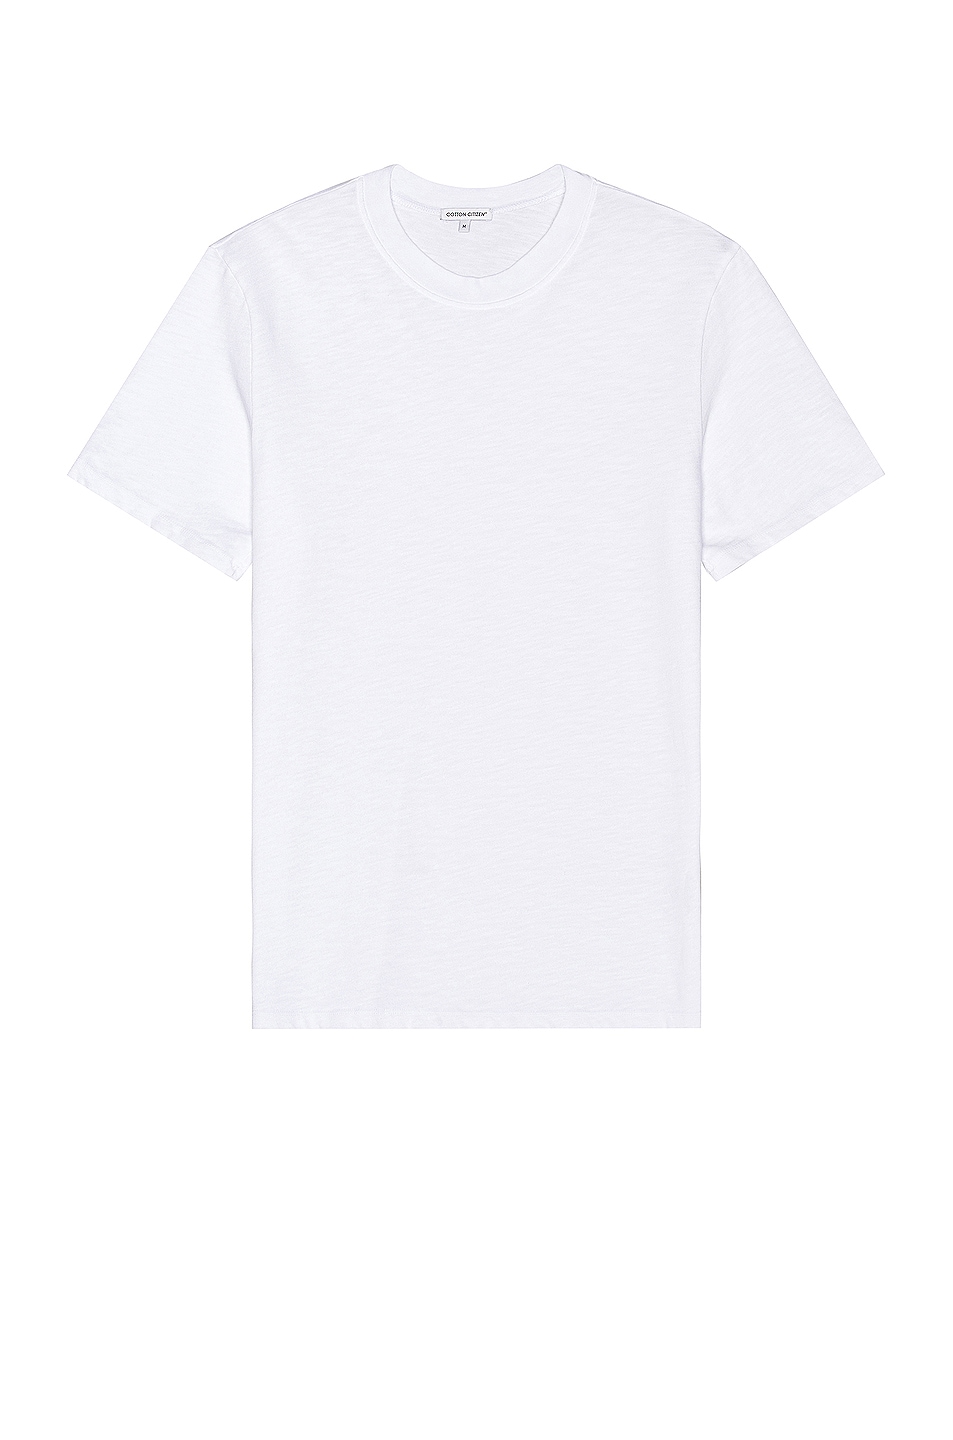 Image 1 of COTTON CITIZEN Presley Tee in White